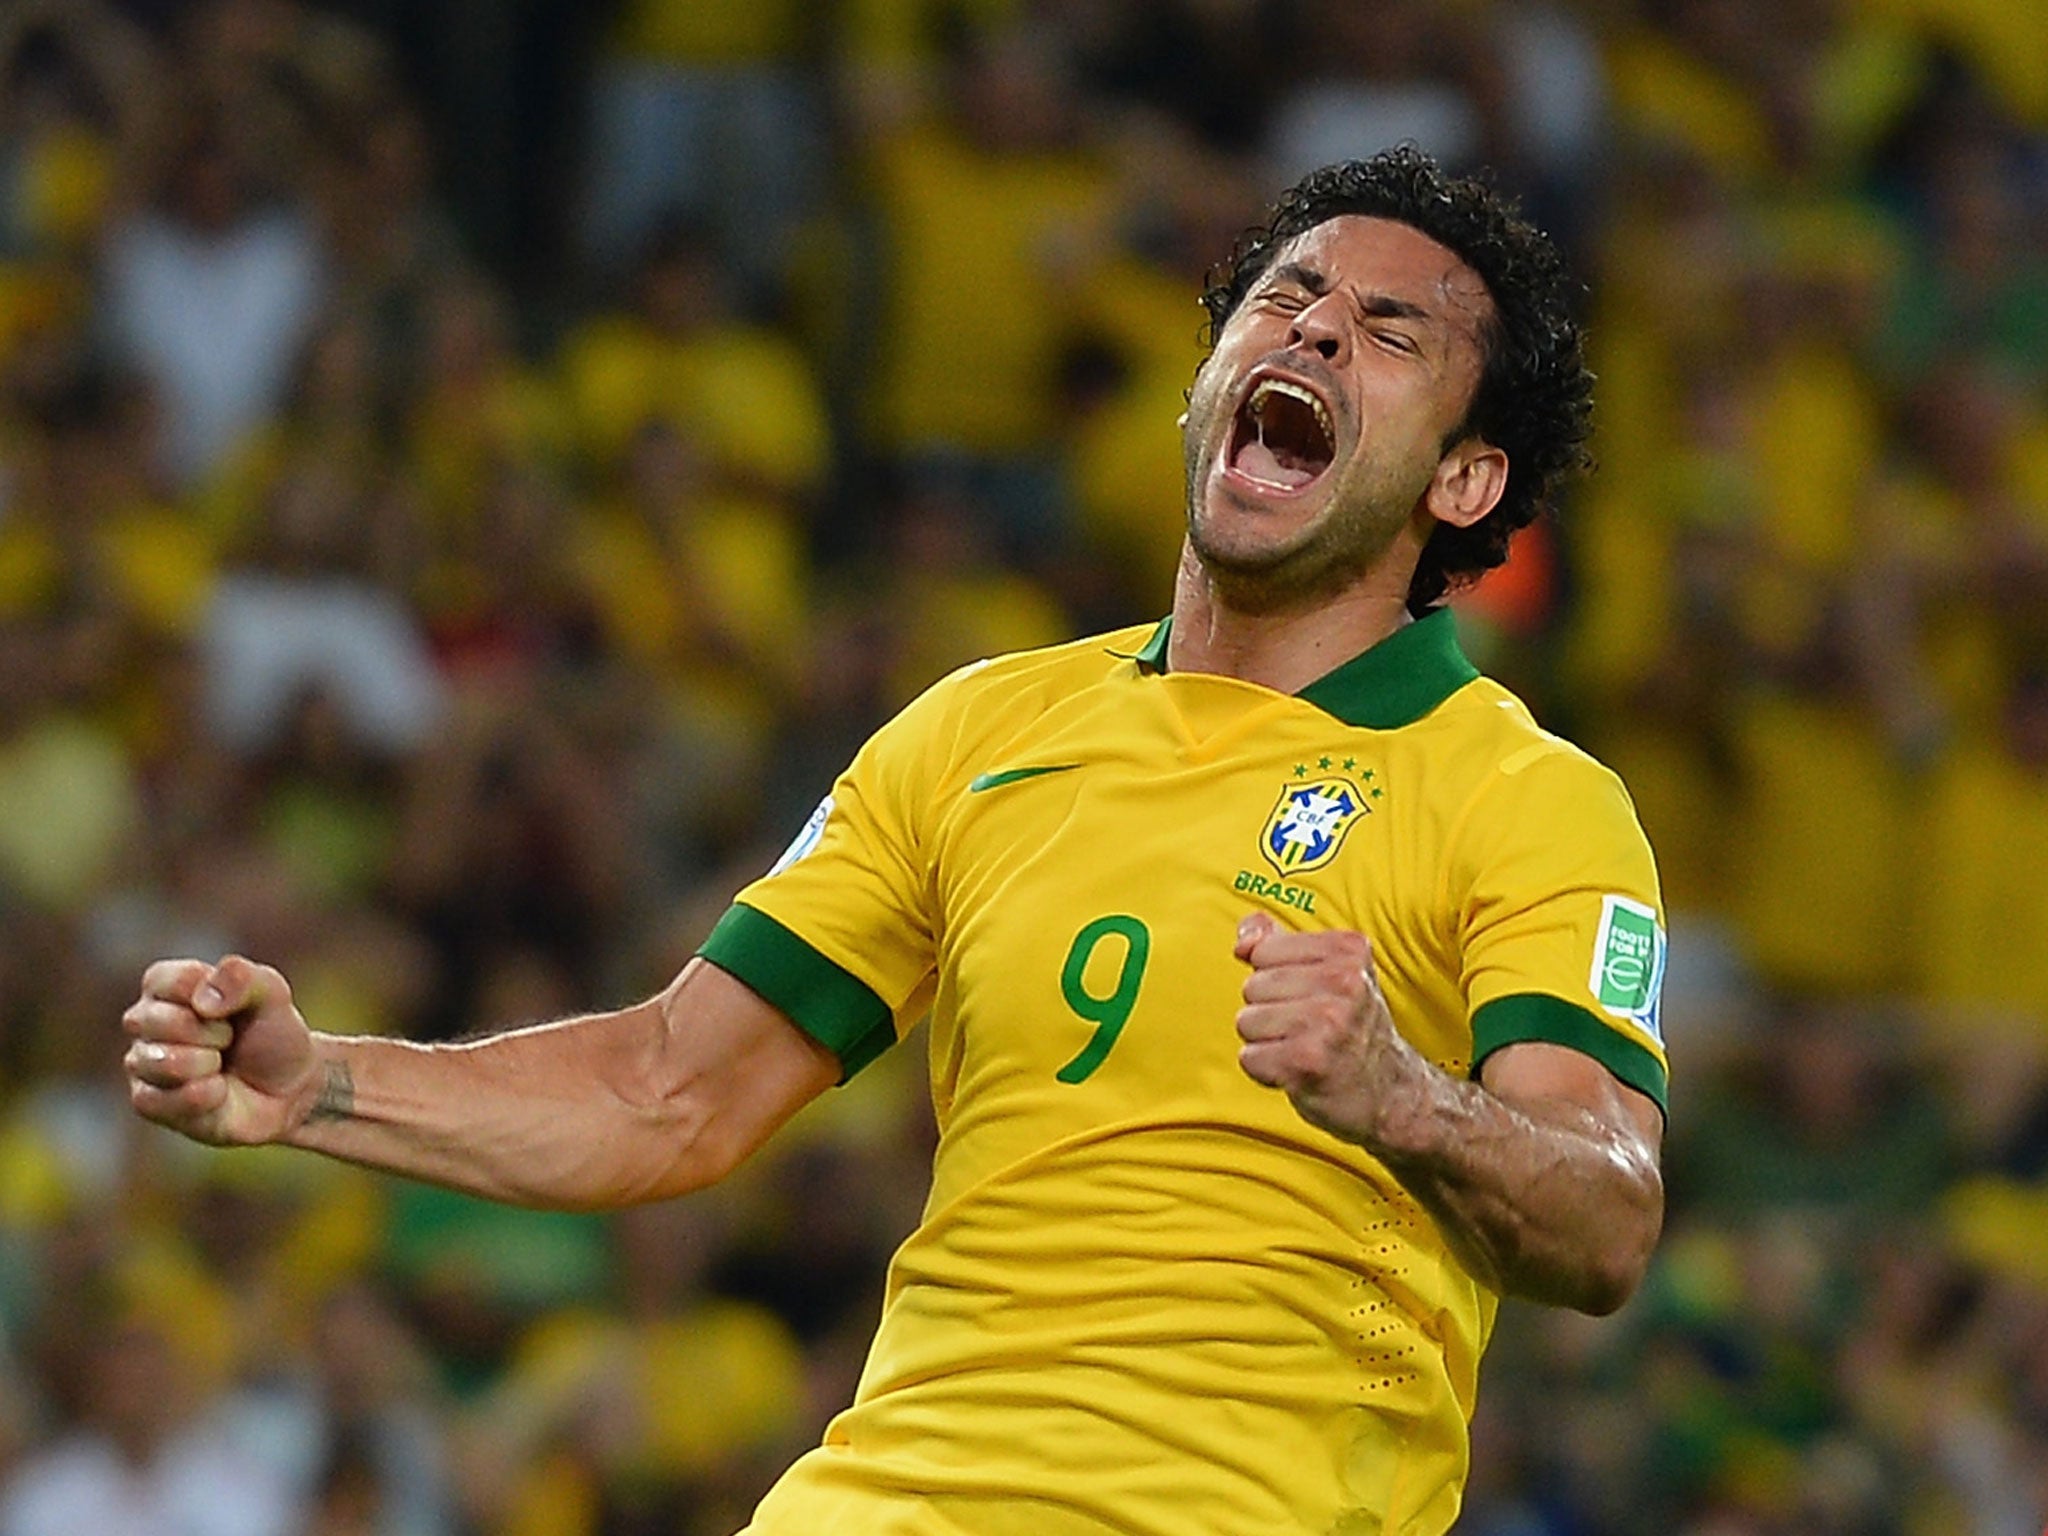 Fred celebrates scoring one of his two goals in Brazil’s 3-0 win over Spain last year